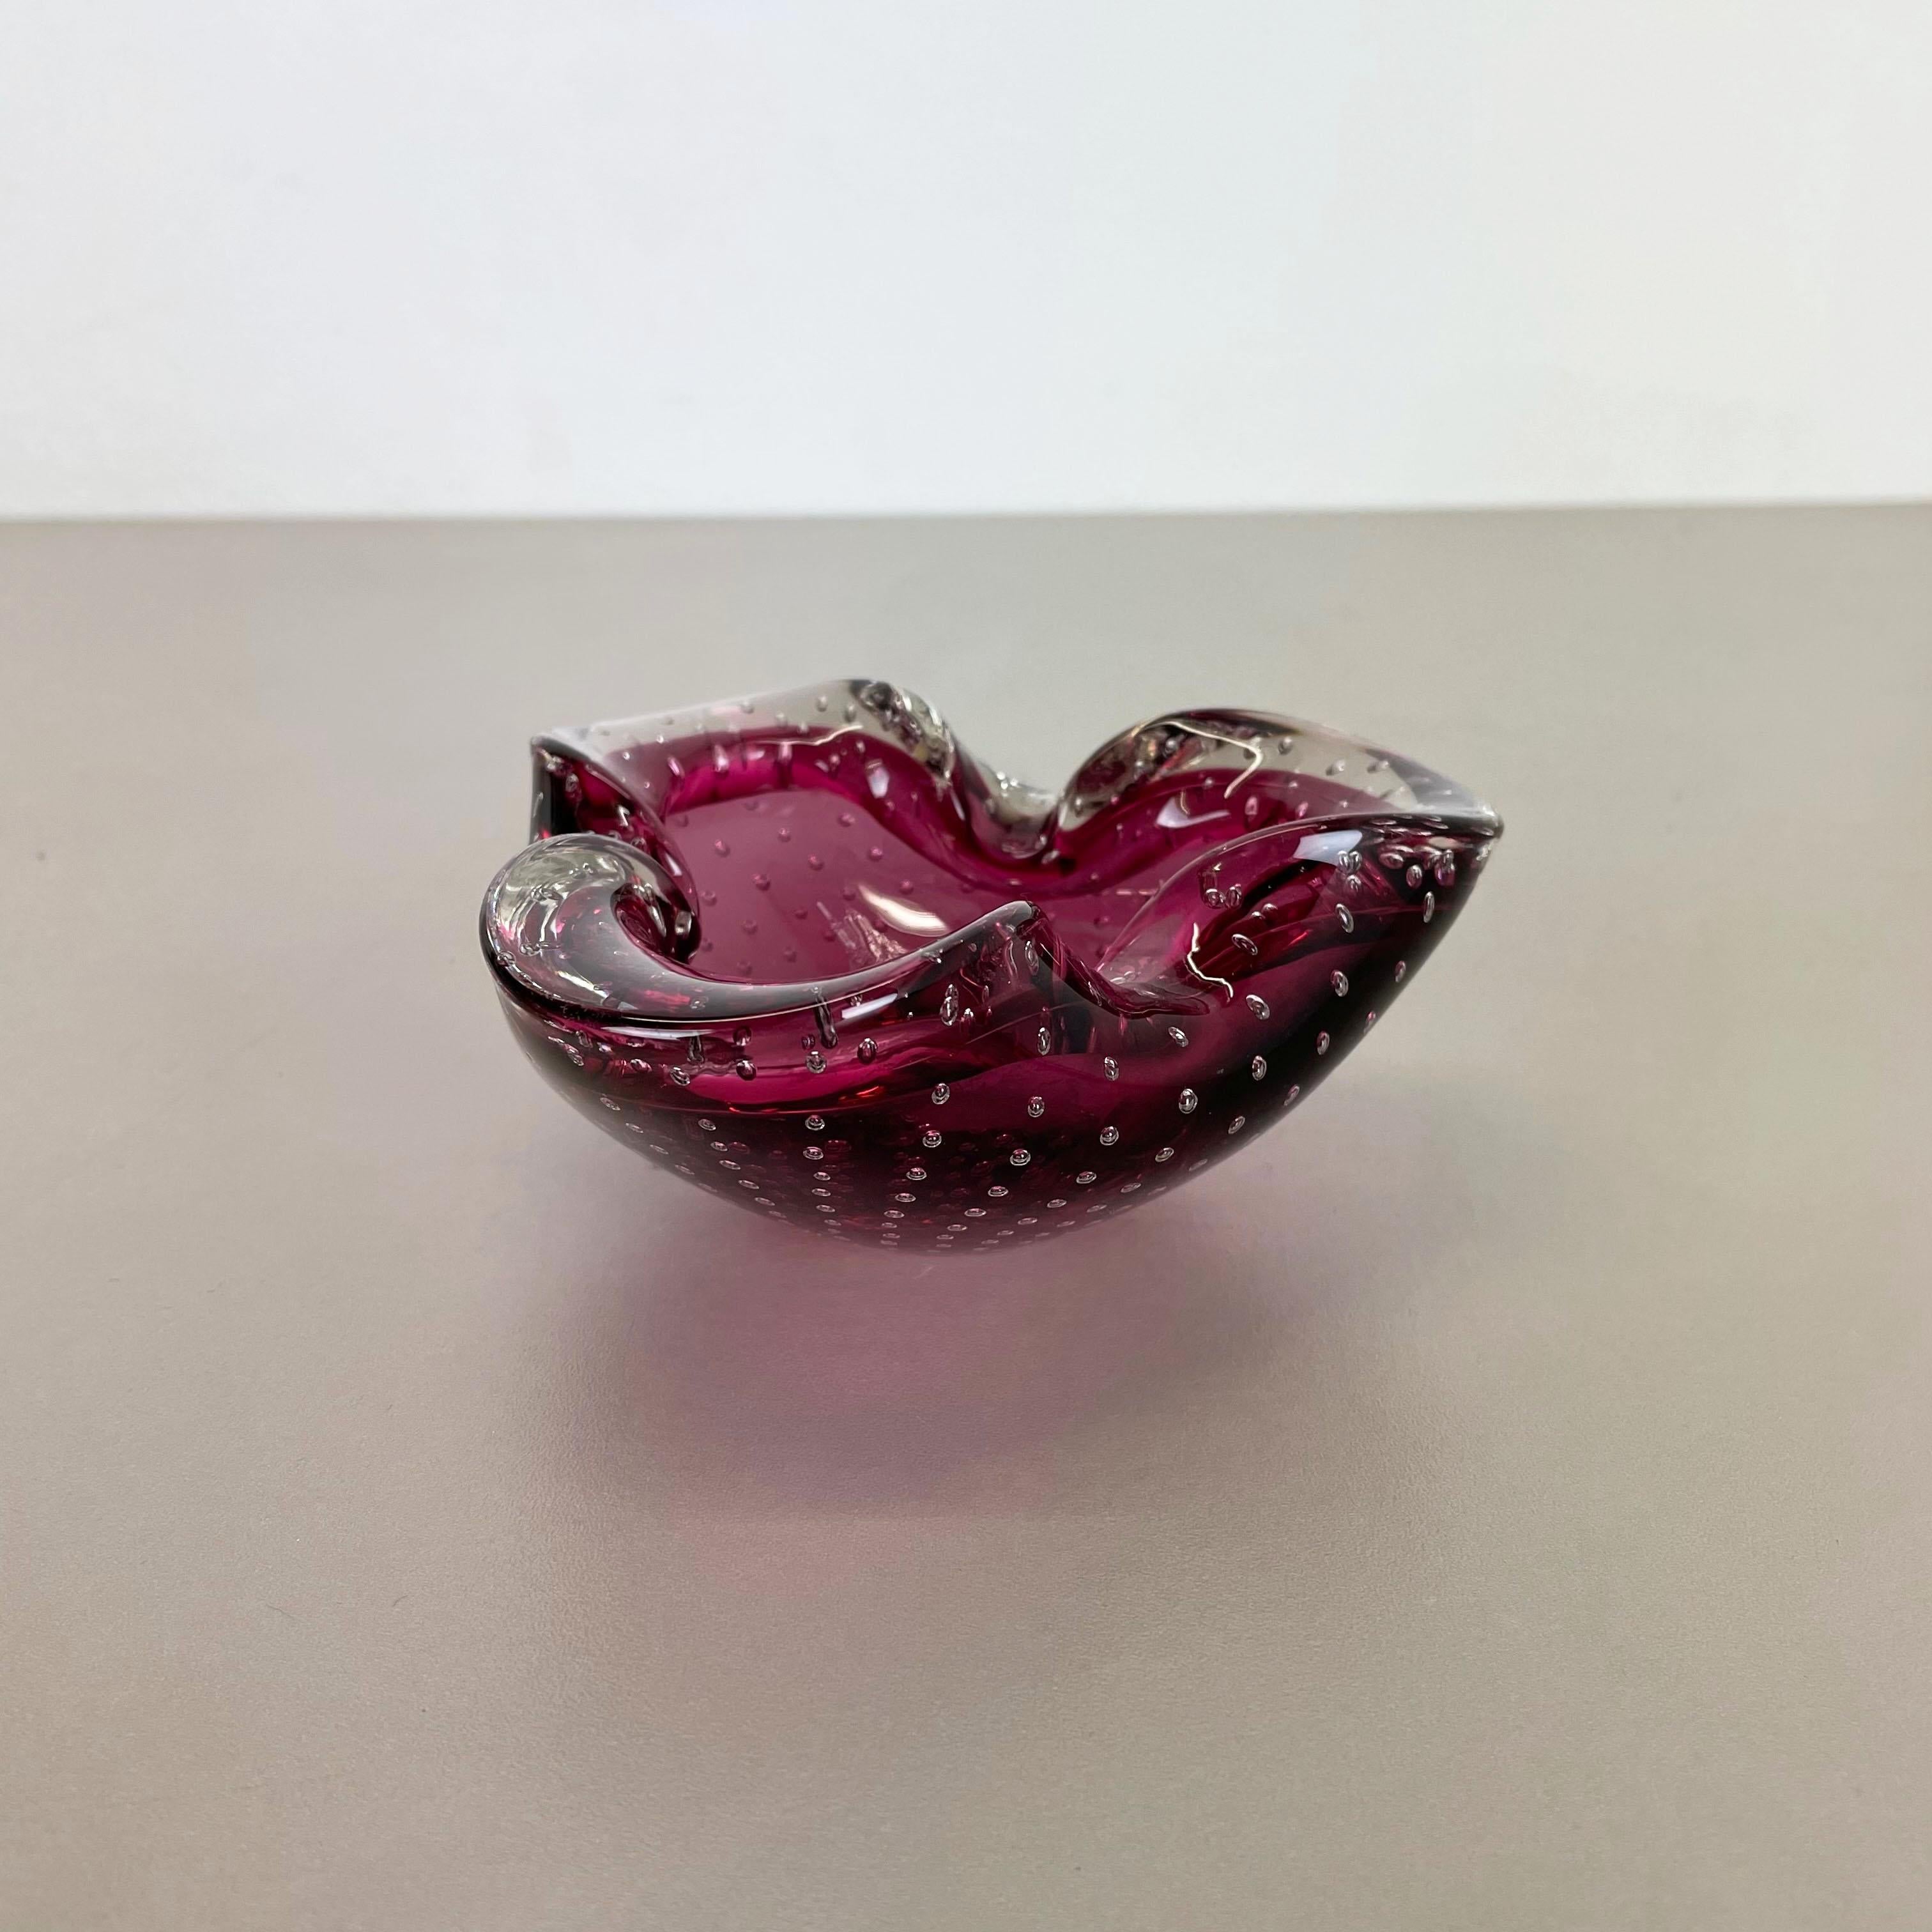 Gorgeous Murano bowl white with controlled bubble interior rich dark pink